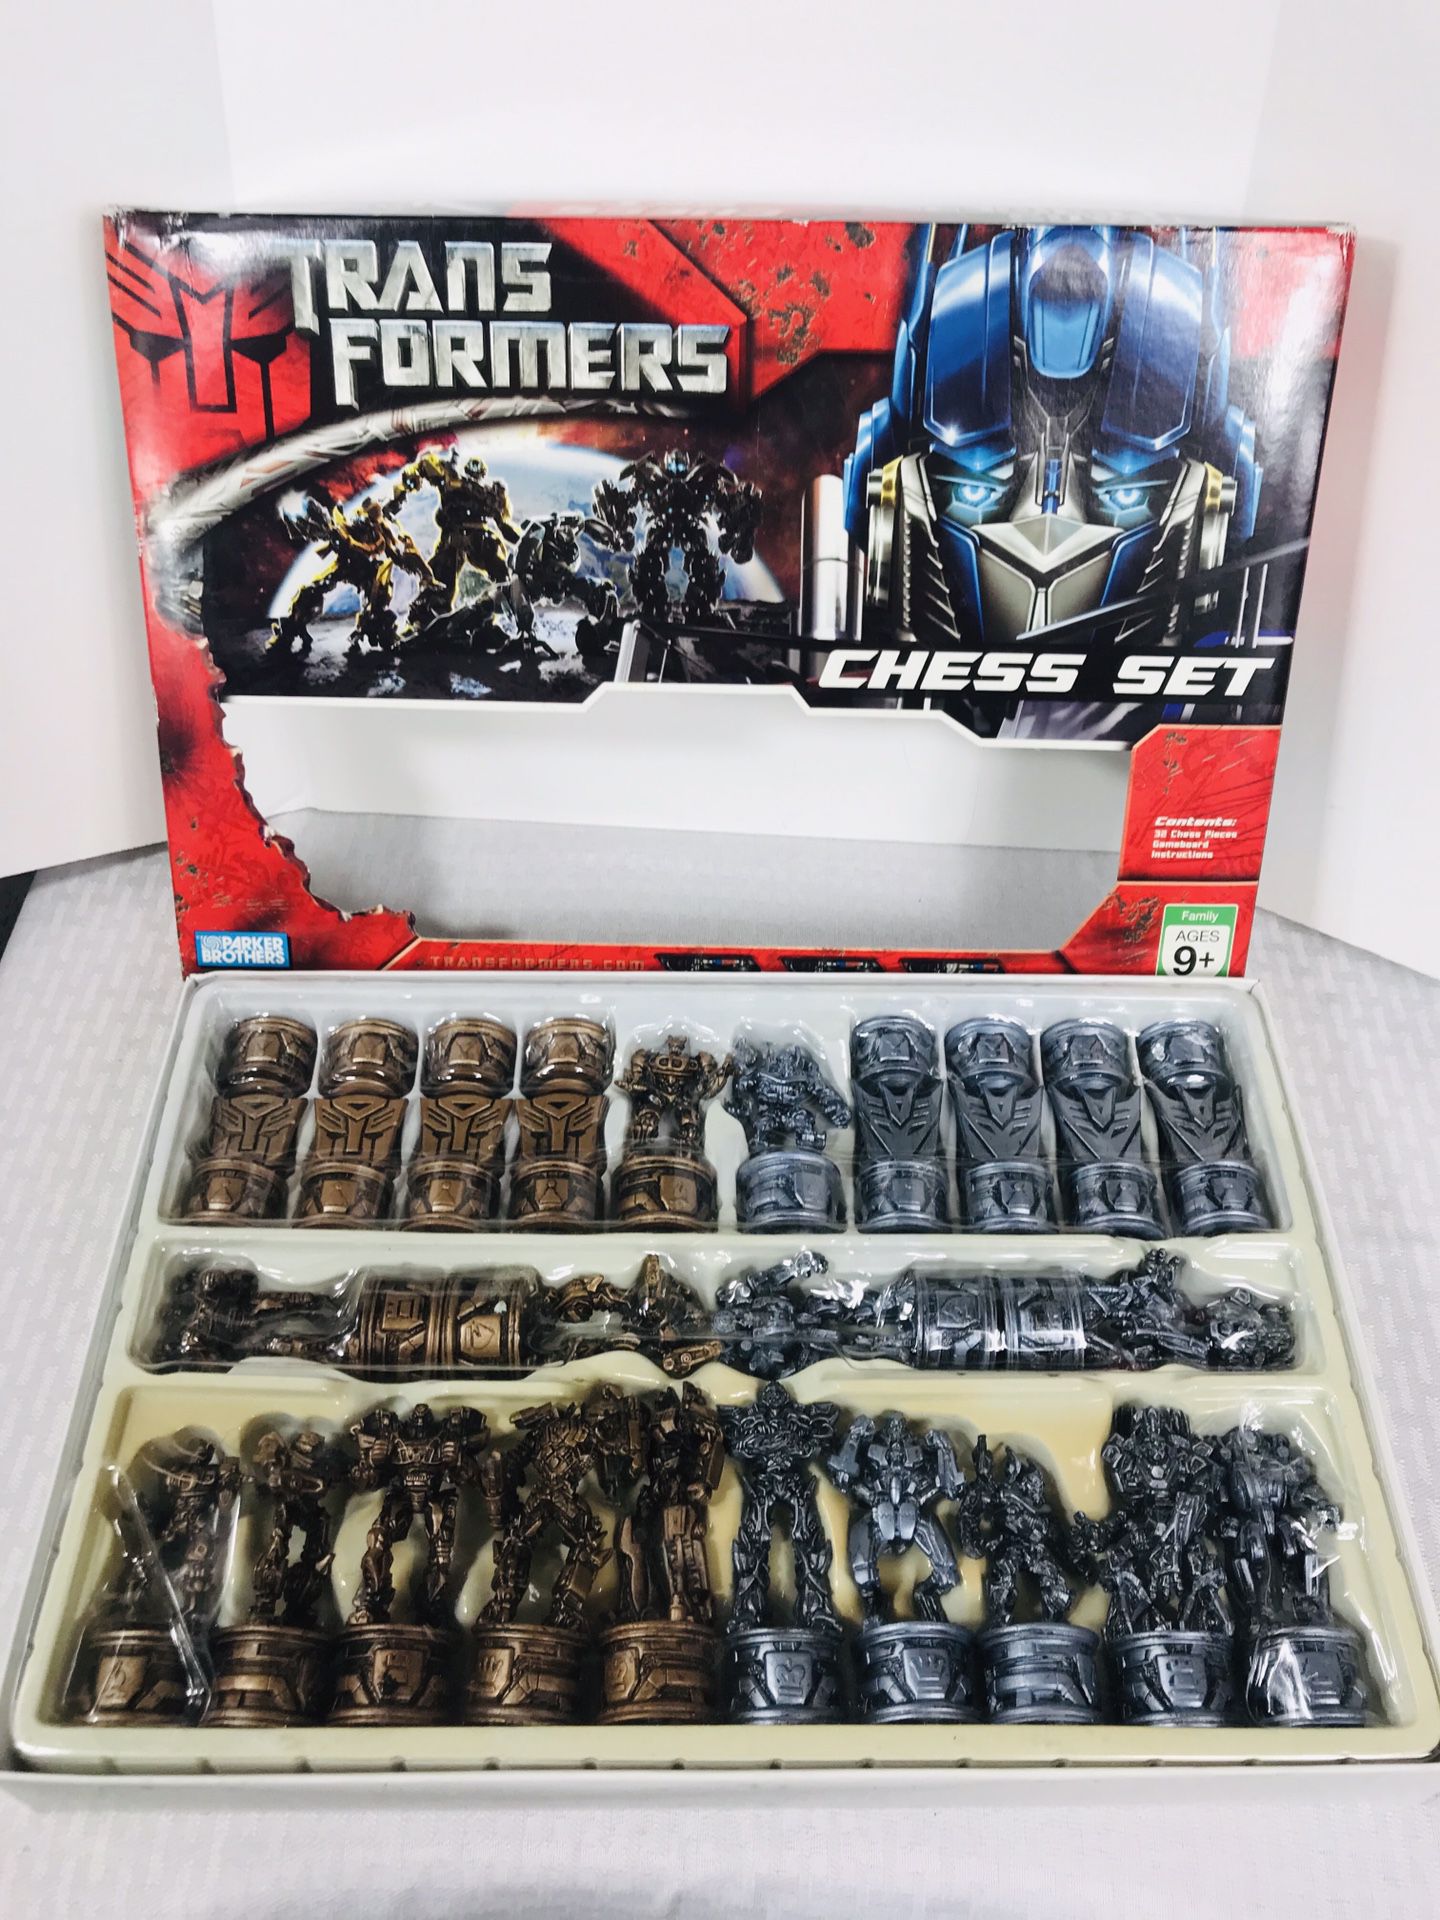 2007 Hasbro Transformers 100% Complete Chess Set